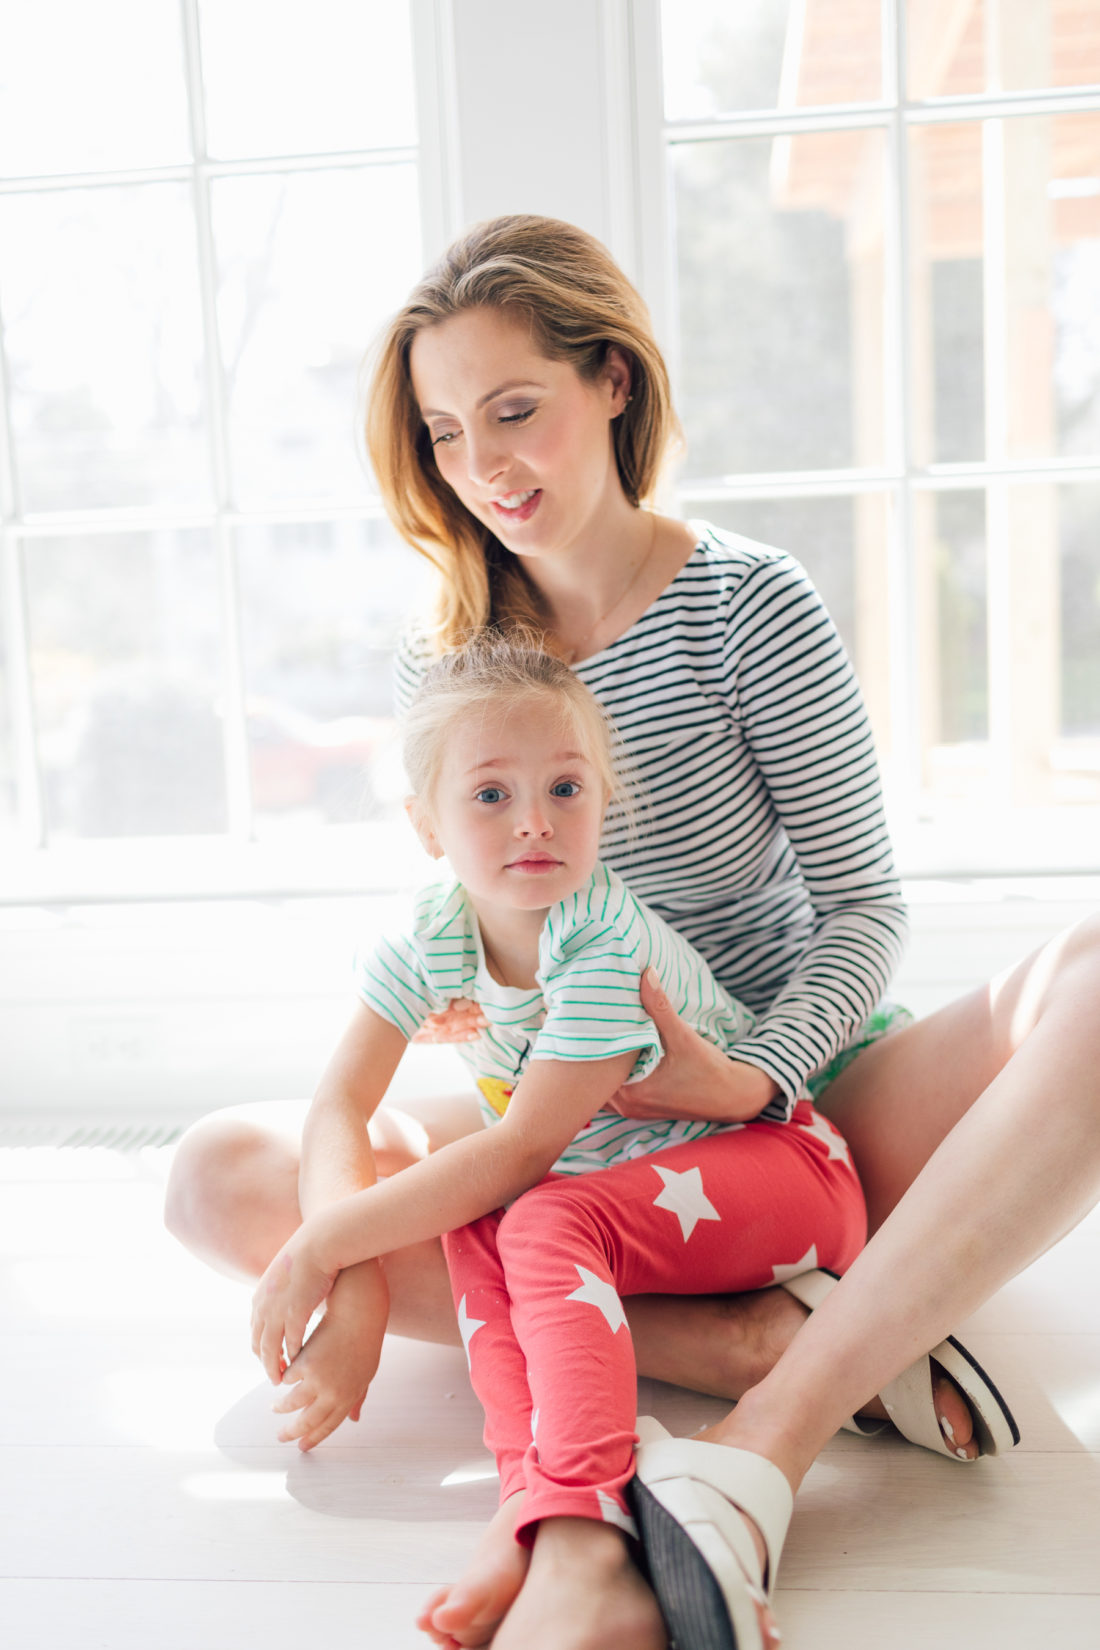 Eva Amurri Martino sits with daughter Marlowe on her lap in their new home in Connecticut